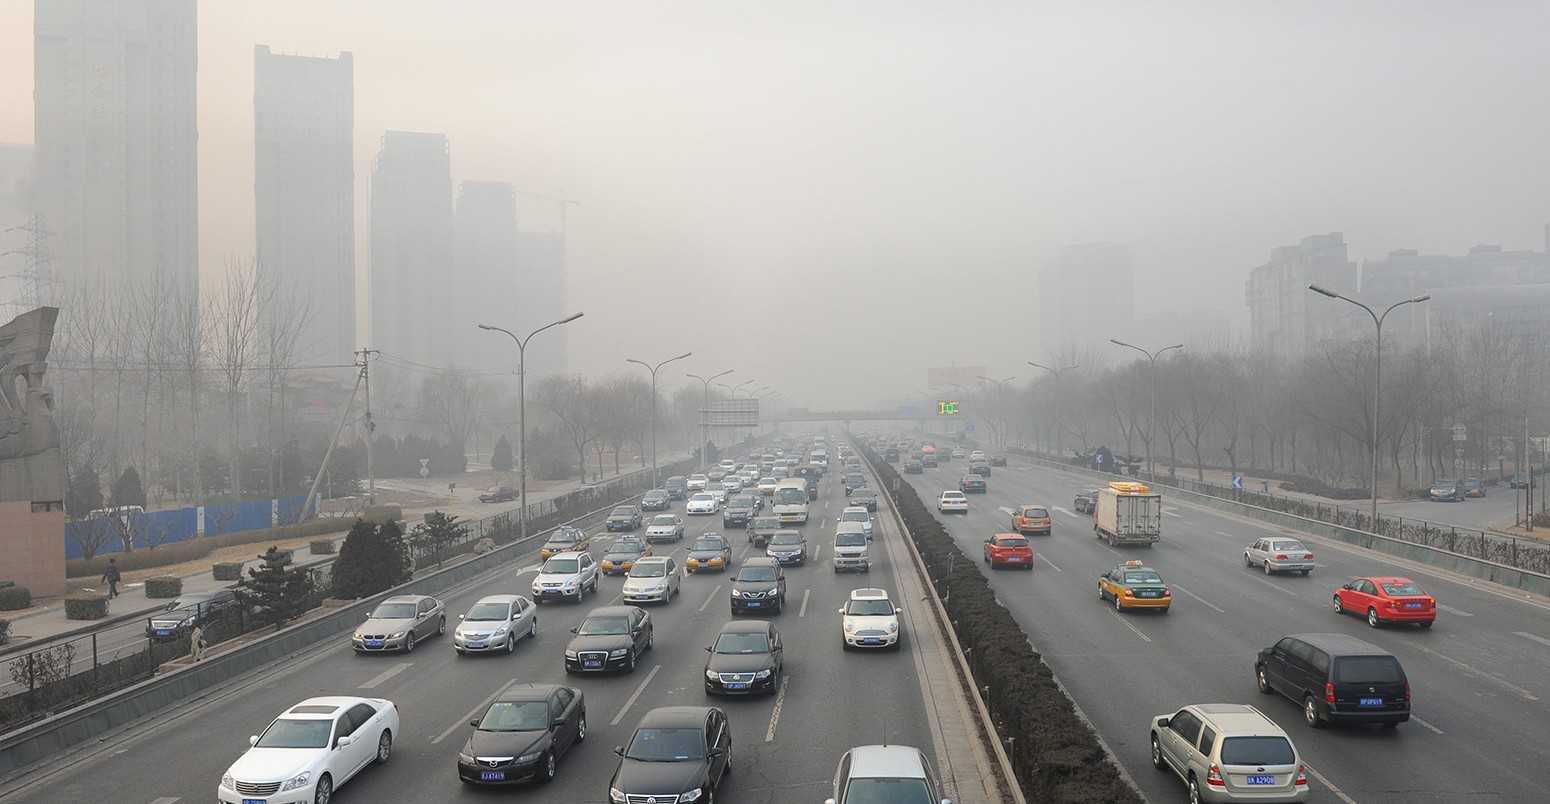 Smog over the traffic in Beijing, China